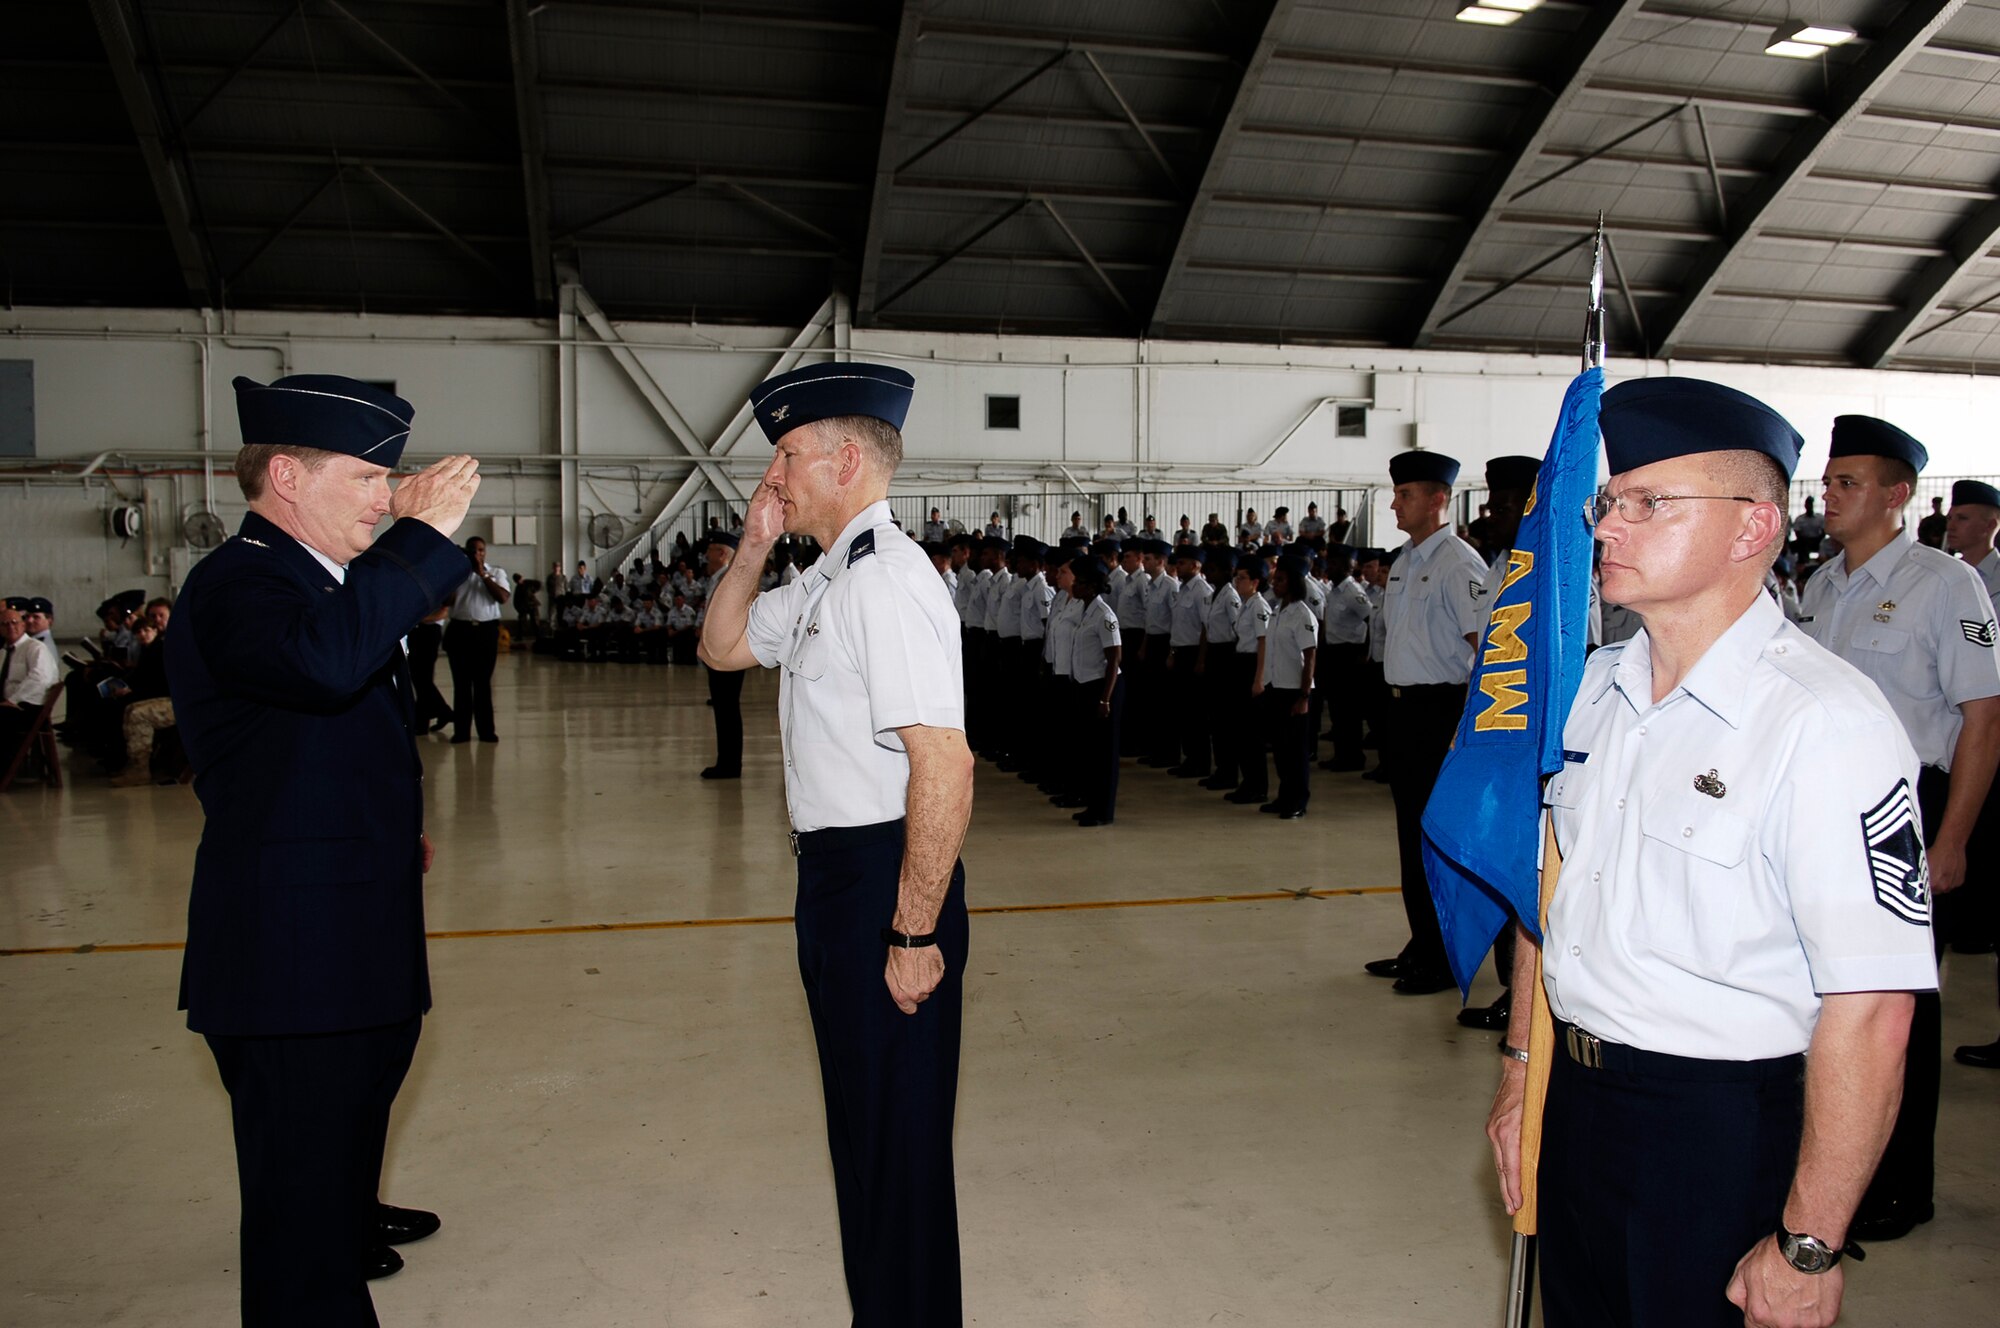 Col. Robert Thomas inspects members of the 6th Air Mobility Wing during a change of command ceremony Monday. He relinquished command of the wing to Col. Lawrence Martin.  (U.S. Air Force photo by Tech. Sgt. Sean White)